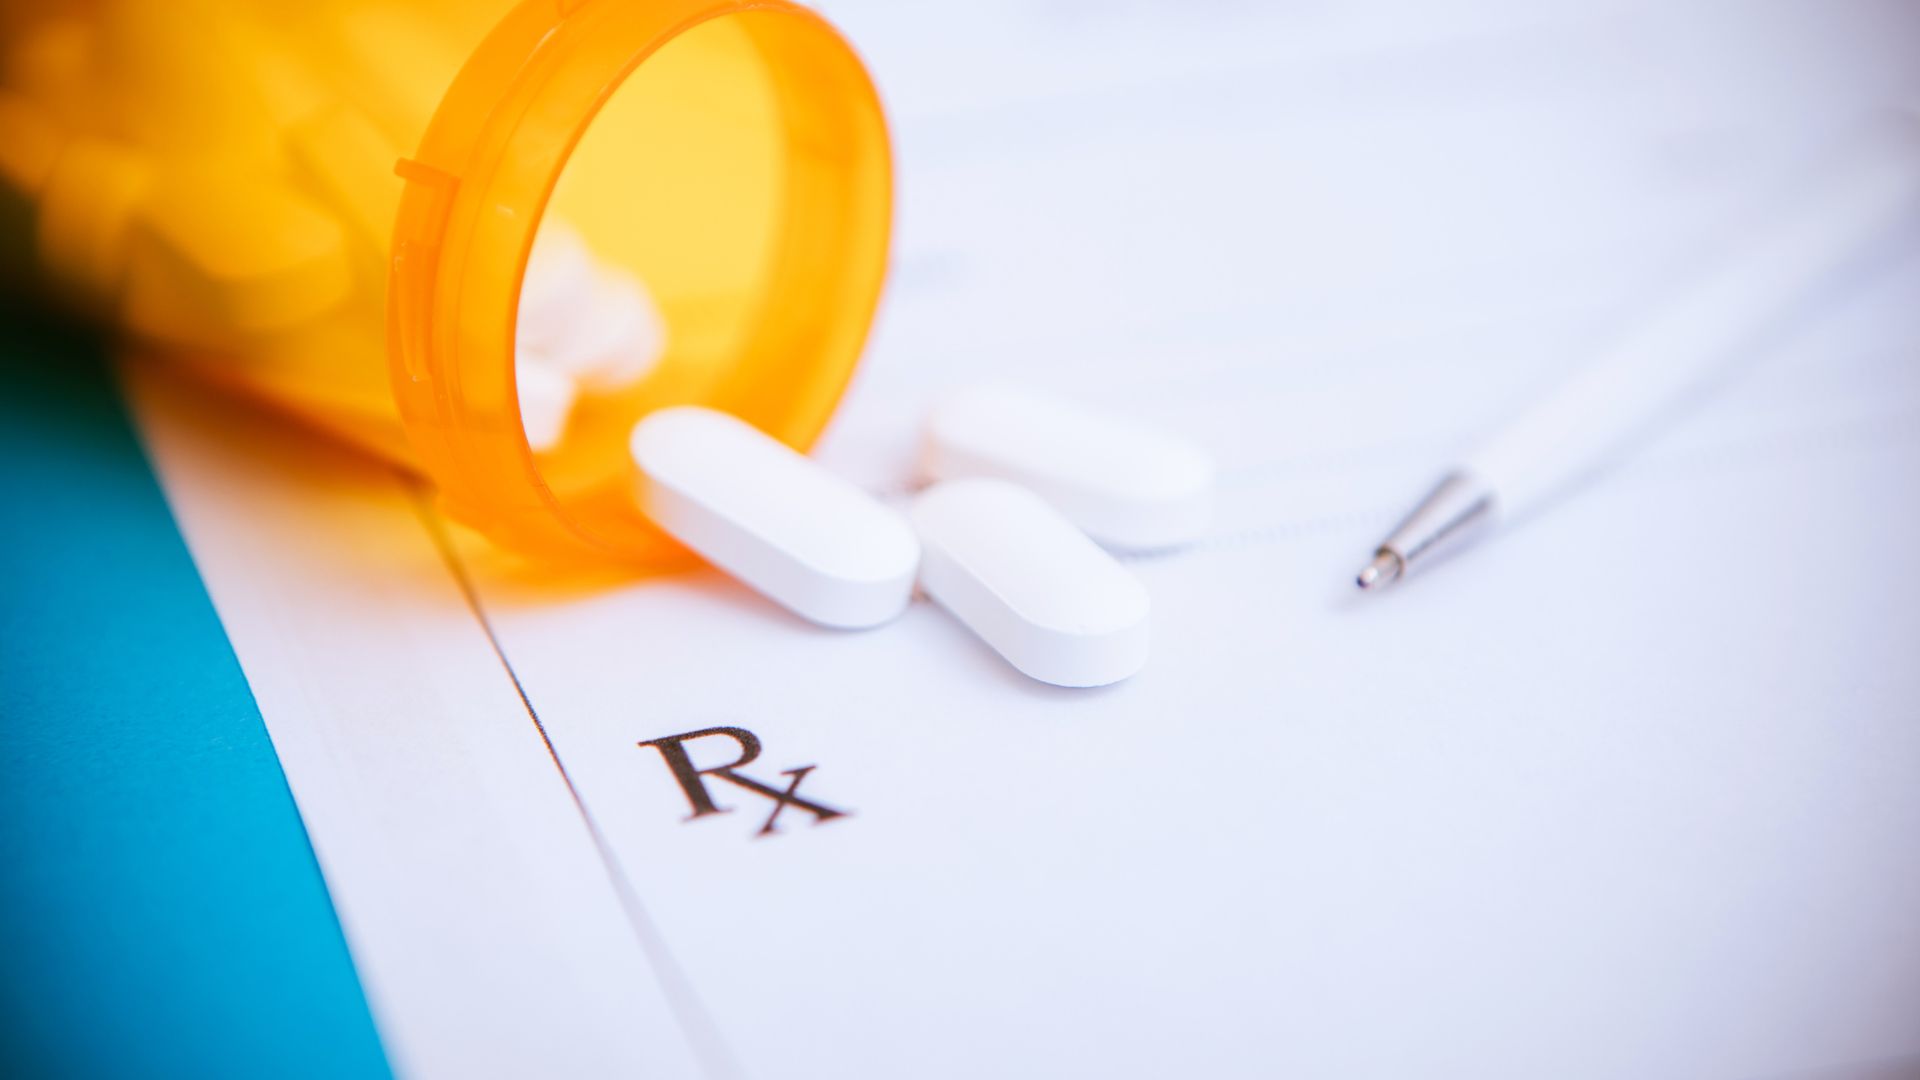 White pills spill out of an orange prescription bottle and onto a page that reads "RX"...